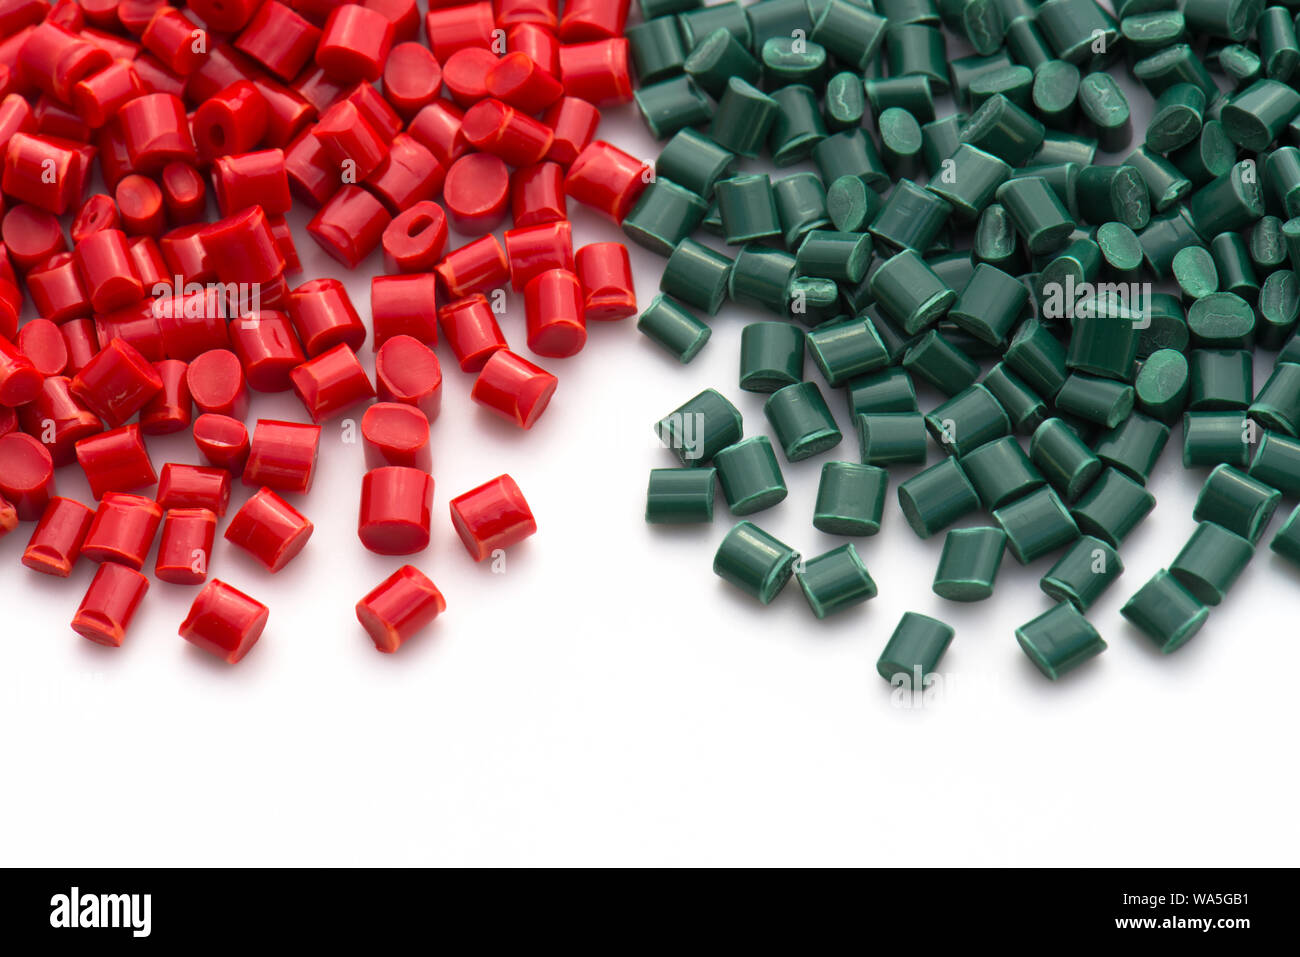 dyed polymer resin for injection molding Stock Photo